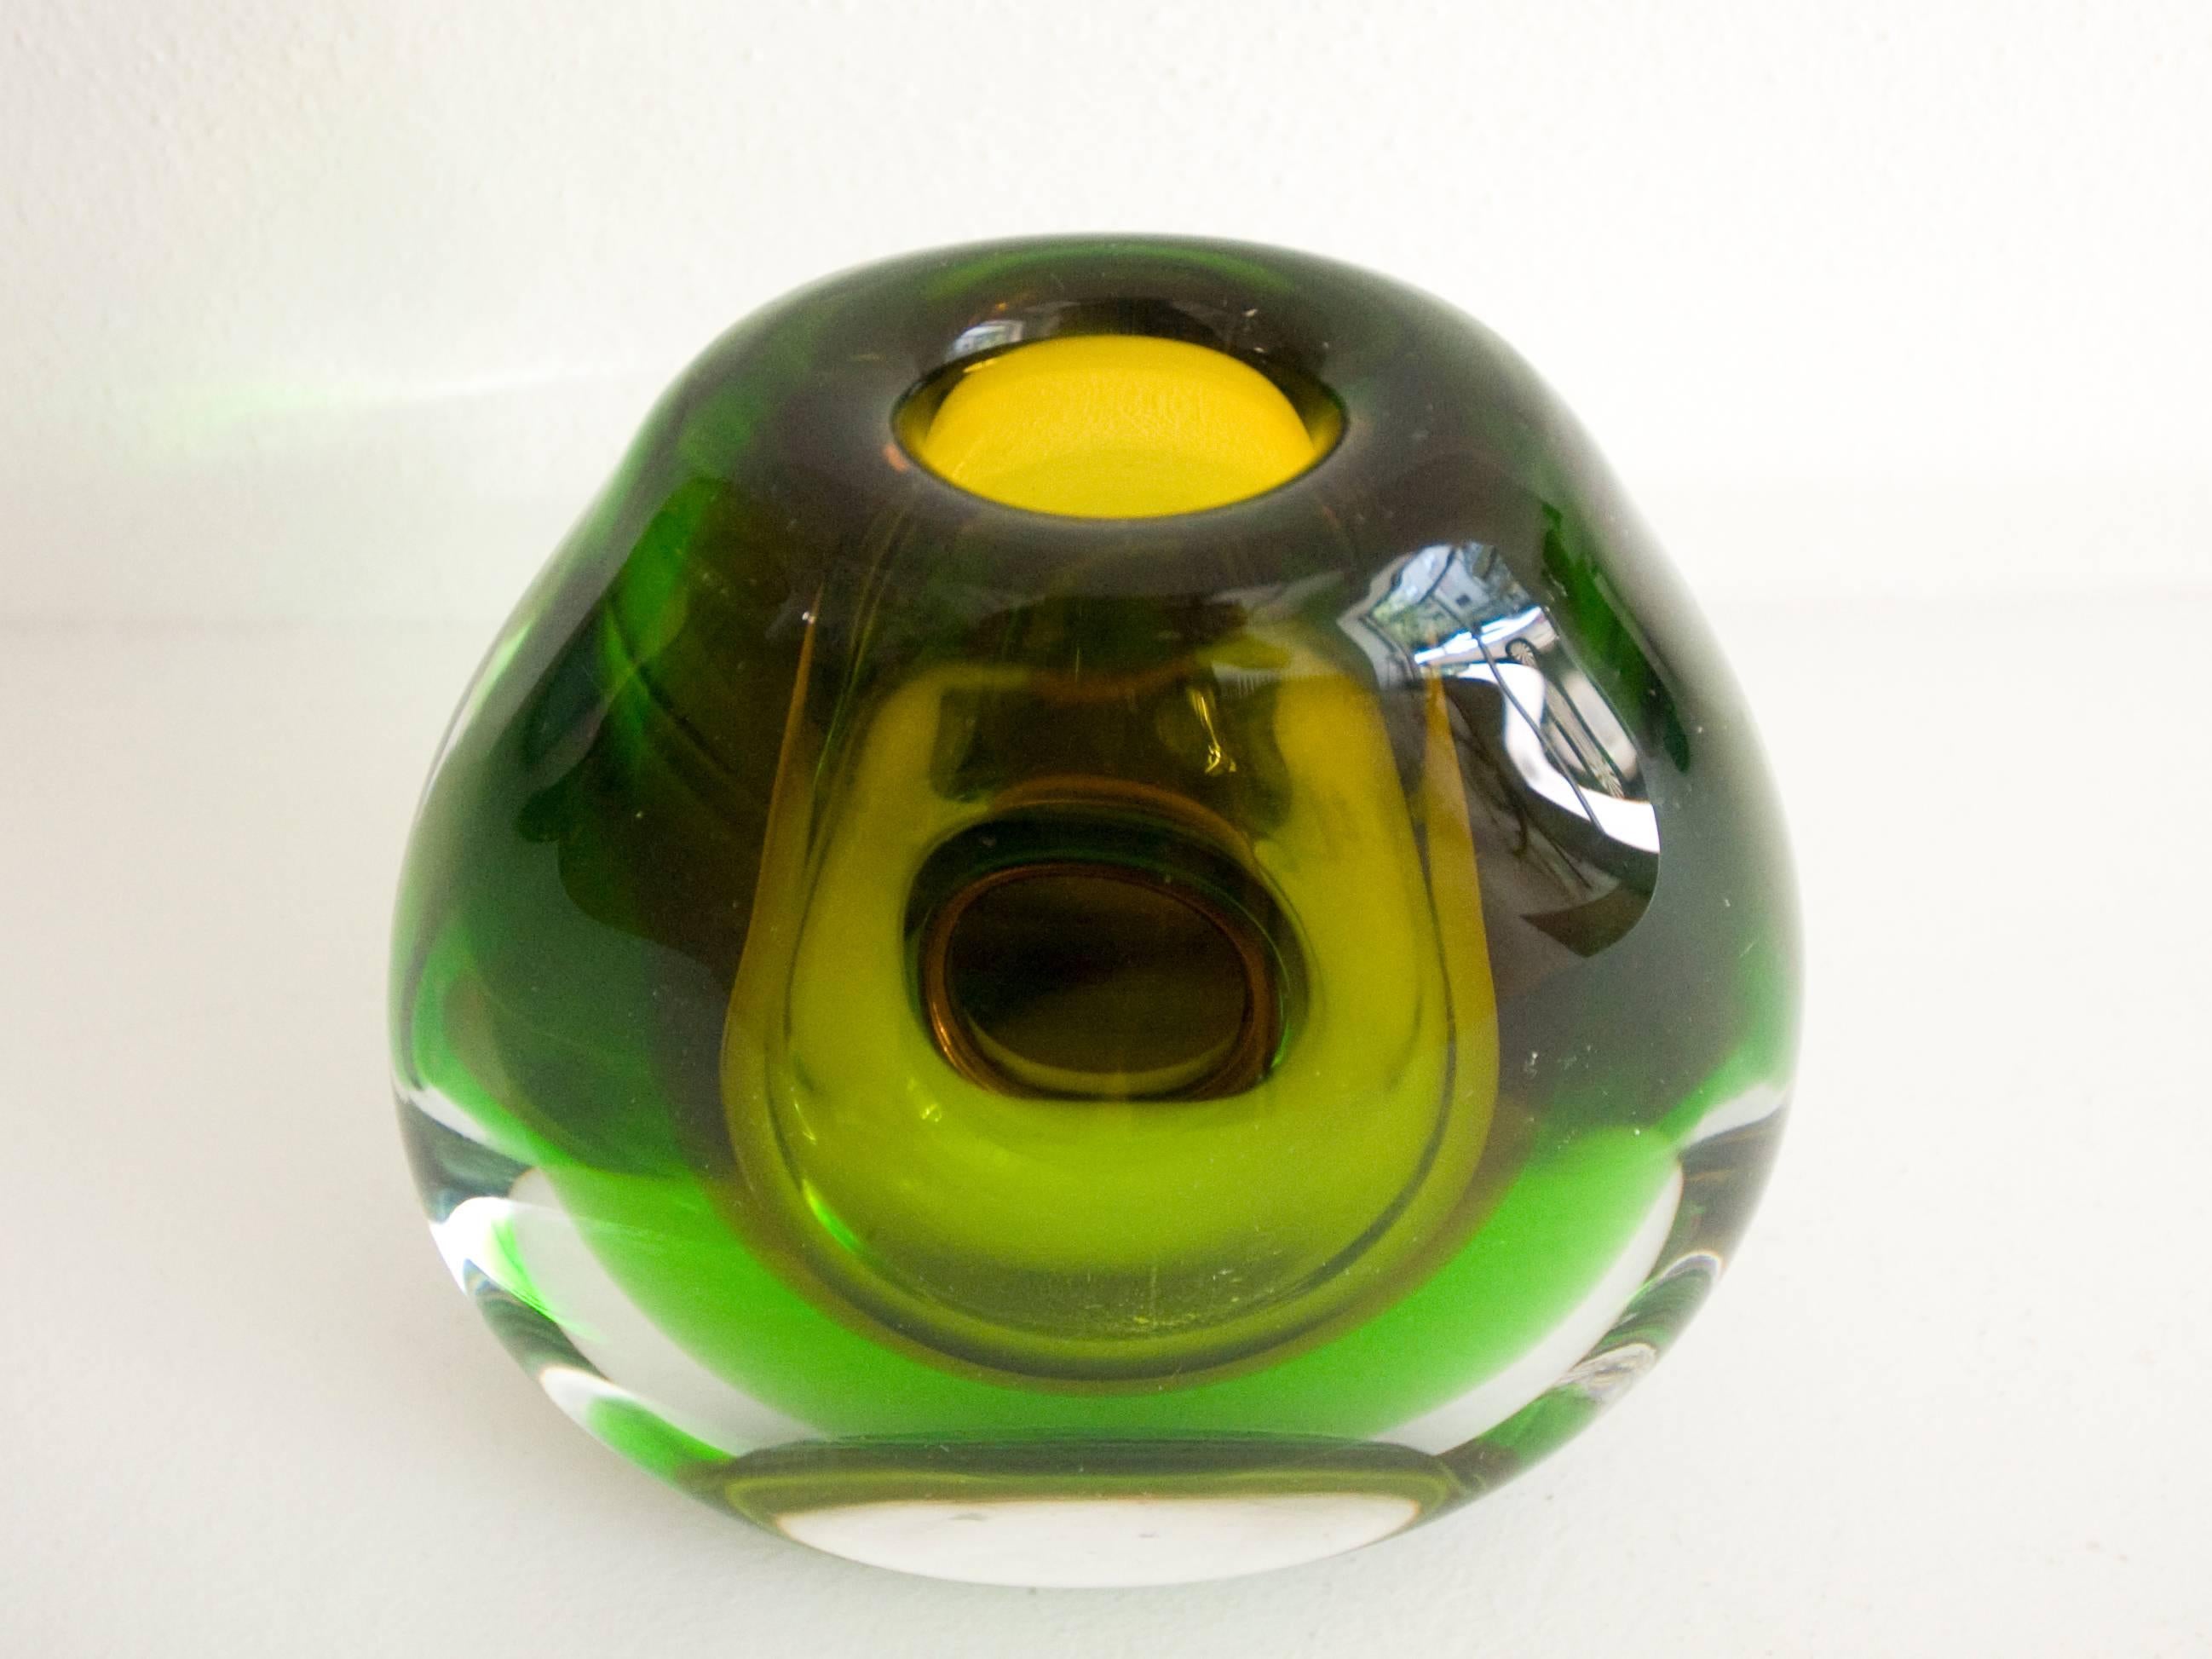 Czech Vintage Submerged Glass Vase by Vladimir Mika for Moser Glasswork, 1967 For Sale